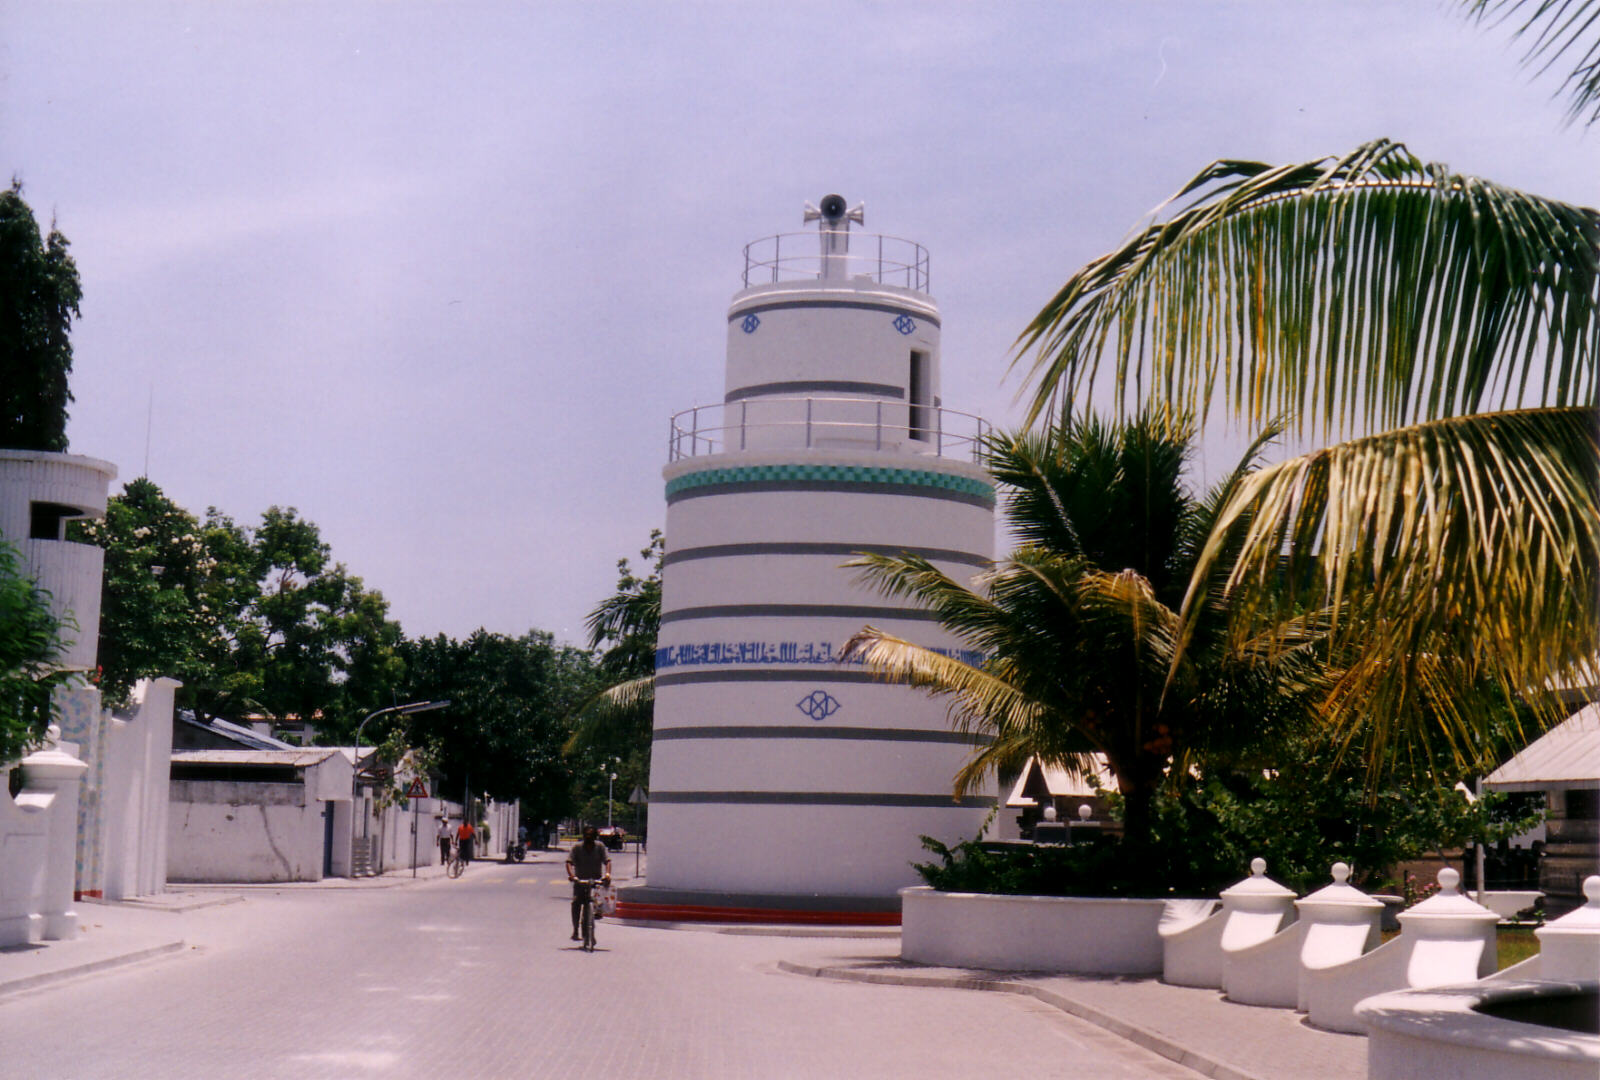 The minaret of the Friday Mosque in Mal, Maldives